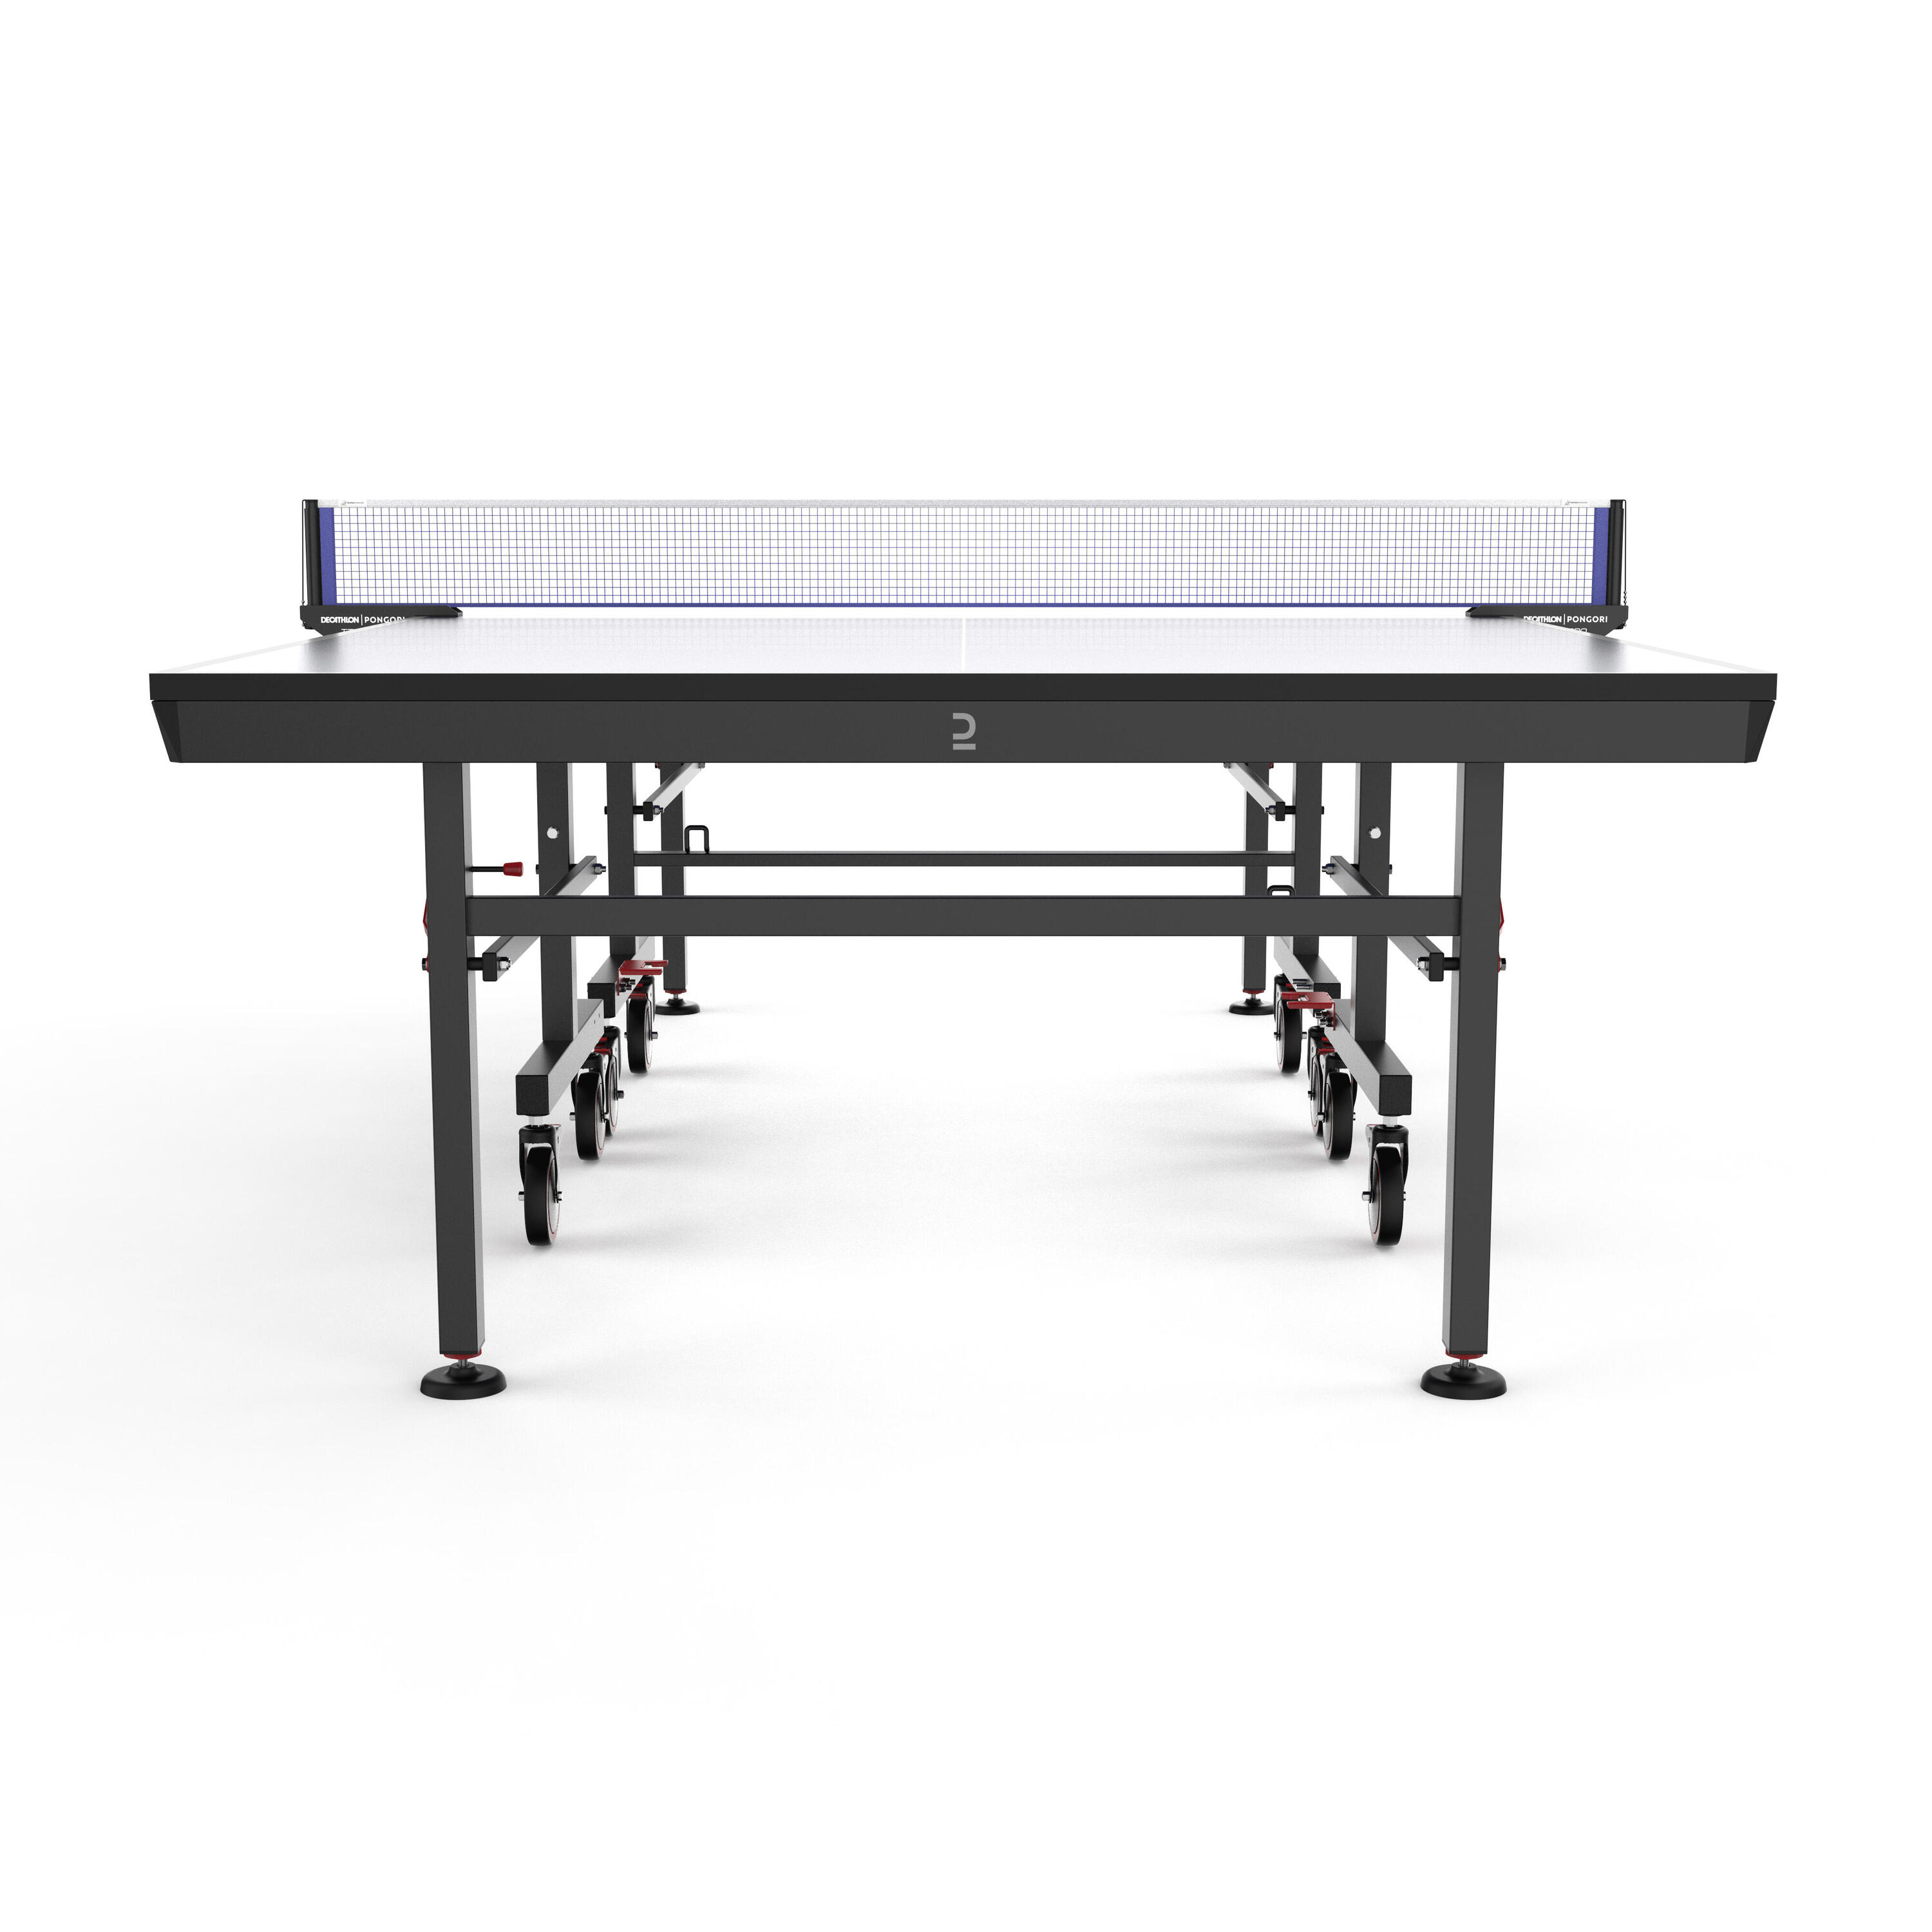 ITTF-Approved Club Table Tennis Table TTT 930 with Blue Tabletops 3/15